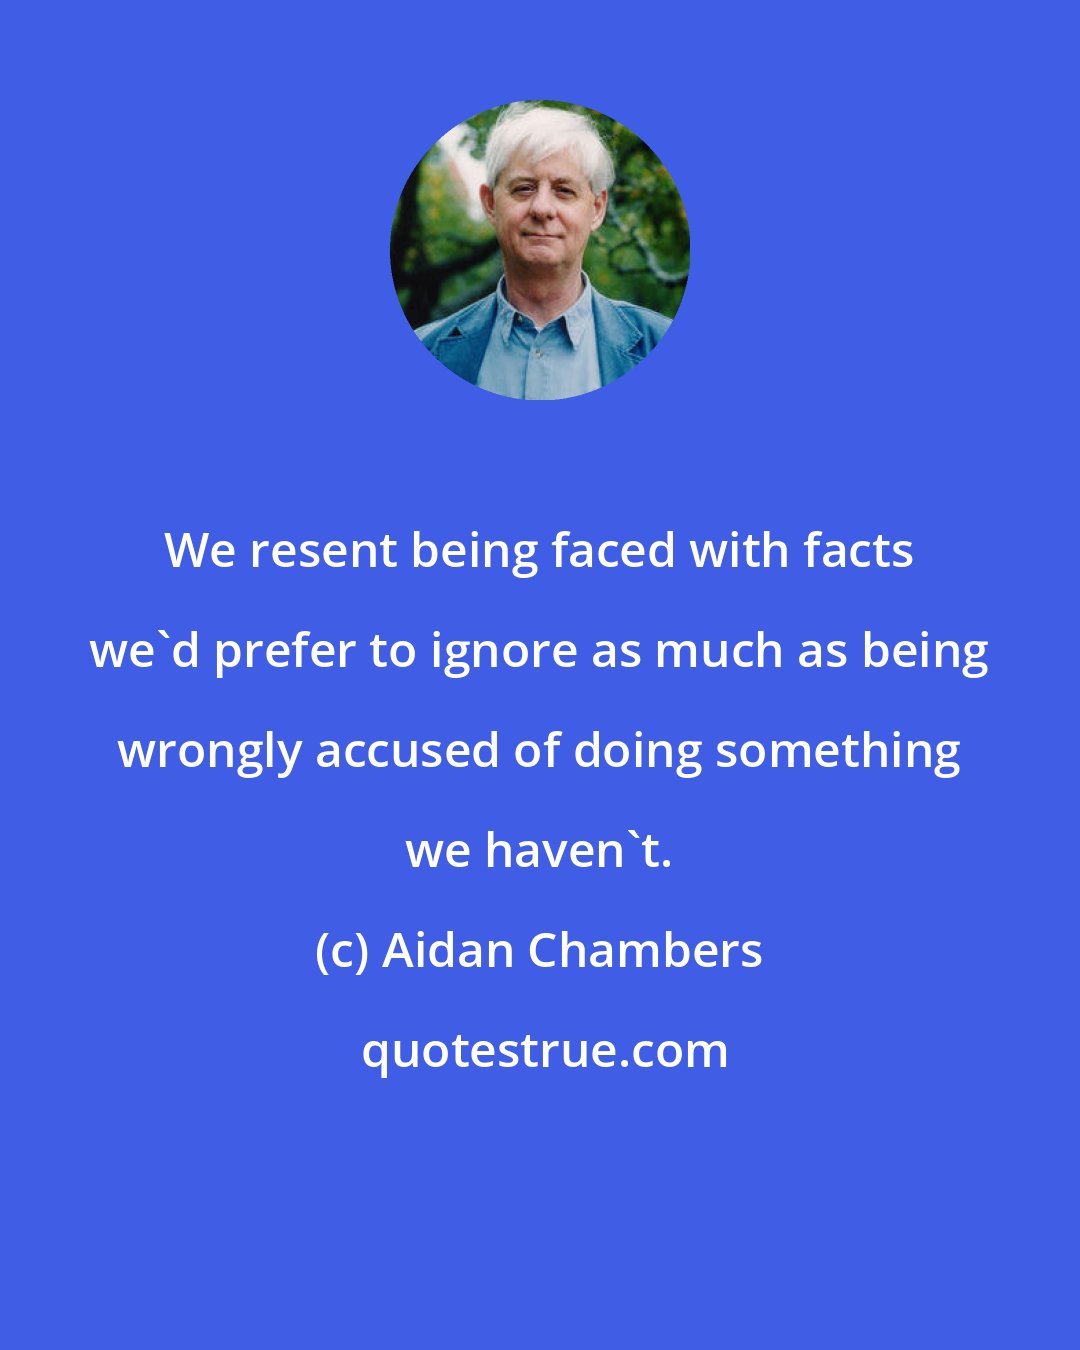 Aidan Chambers: We resent being faced with facts we'd prefer to ignore as much as being wrongly accused of doing something we haven't.